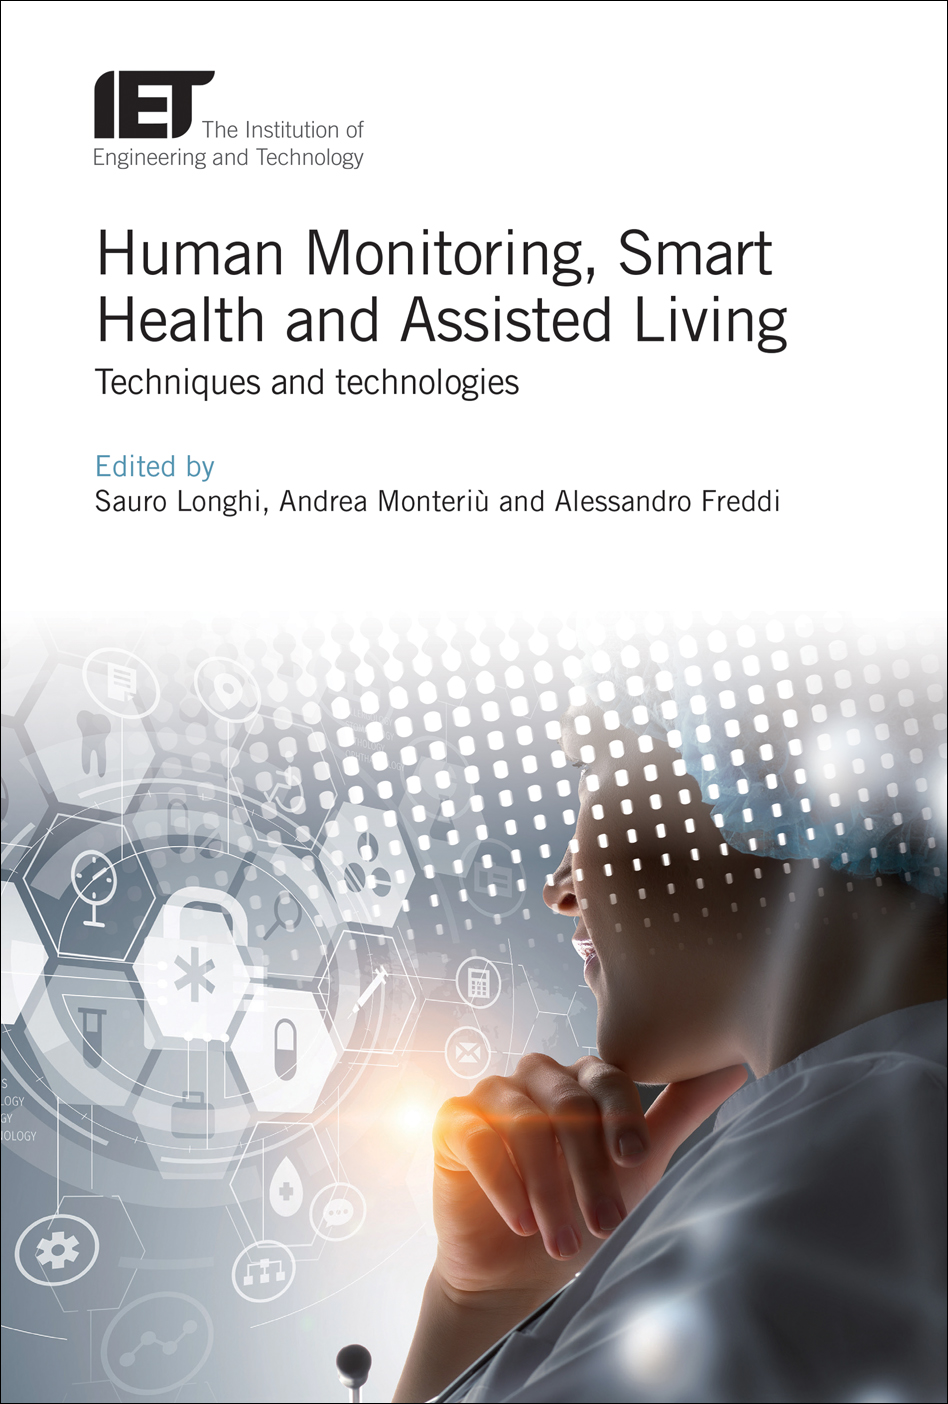 Human Monitoring, Smart Health and Assisted Living, Techniques and technologies